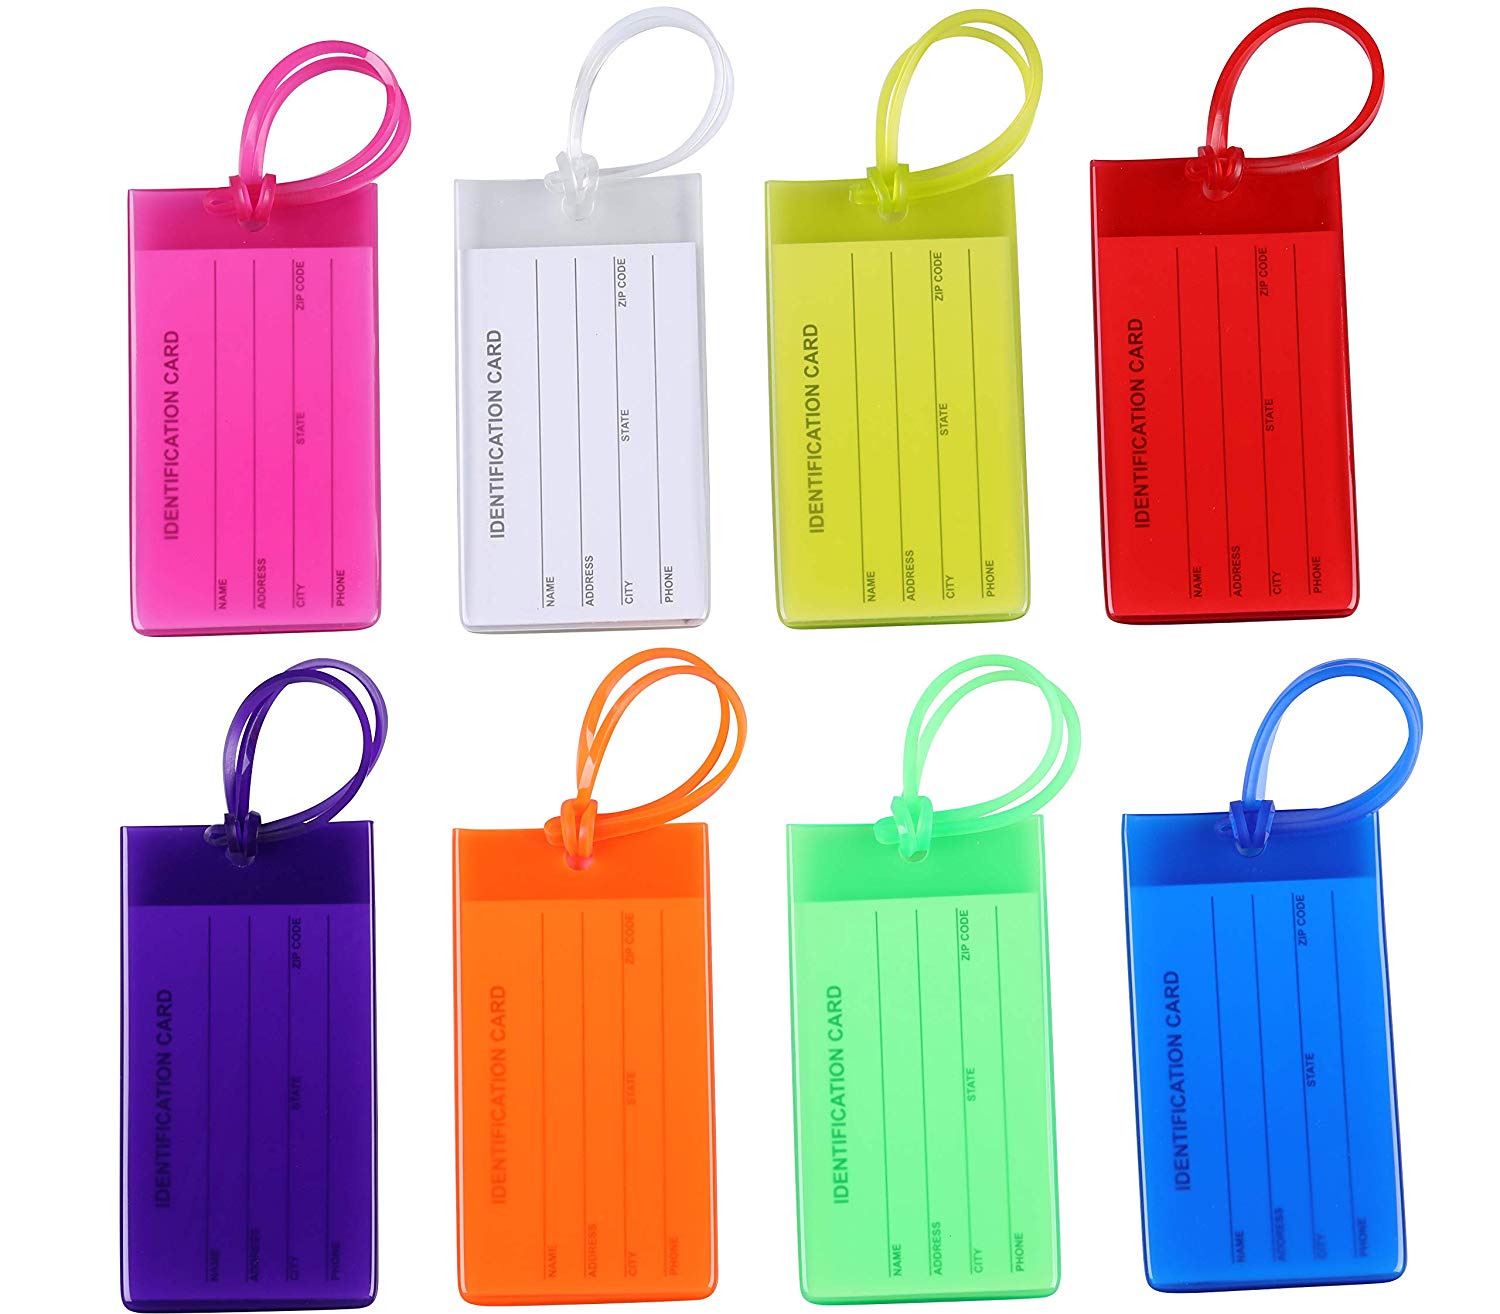 8 Pcs Luggage Tags, with Strings, Name ID Card for Travel Suitcase, Baggage, Bag, Backpack, Silicone, Multicolored - image 1 of 5